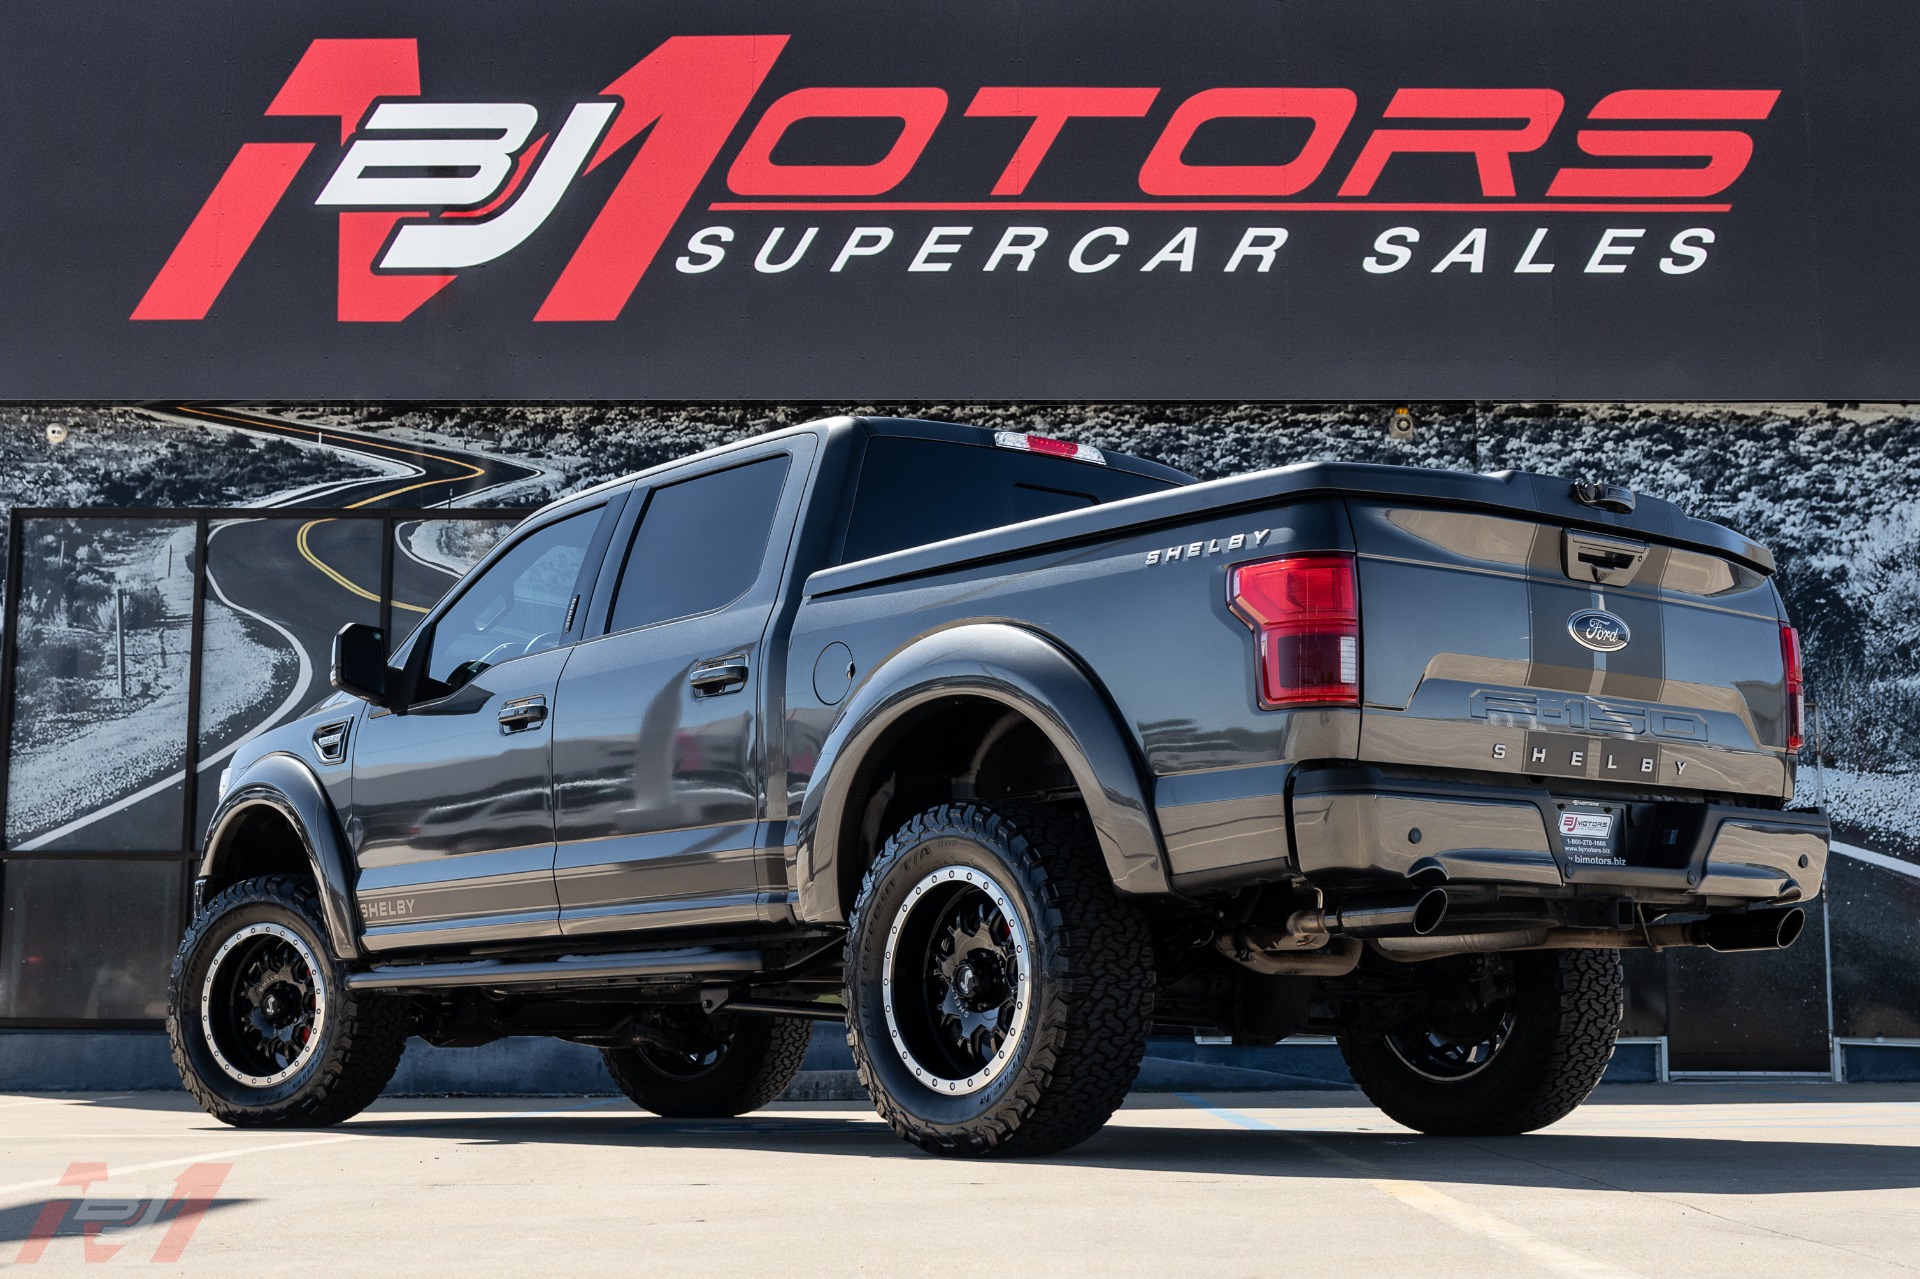 Used-2018-Ford-F-150-Shelby-Supercharged-755HP